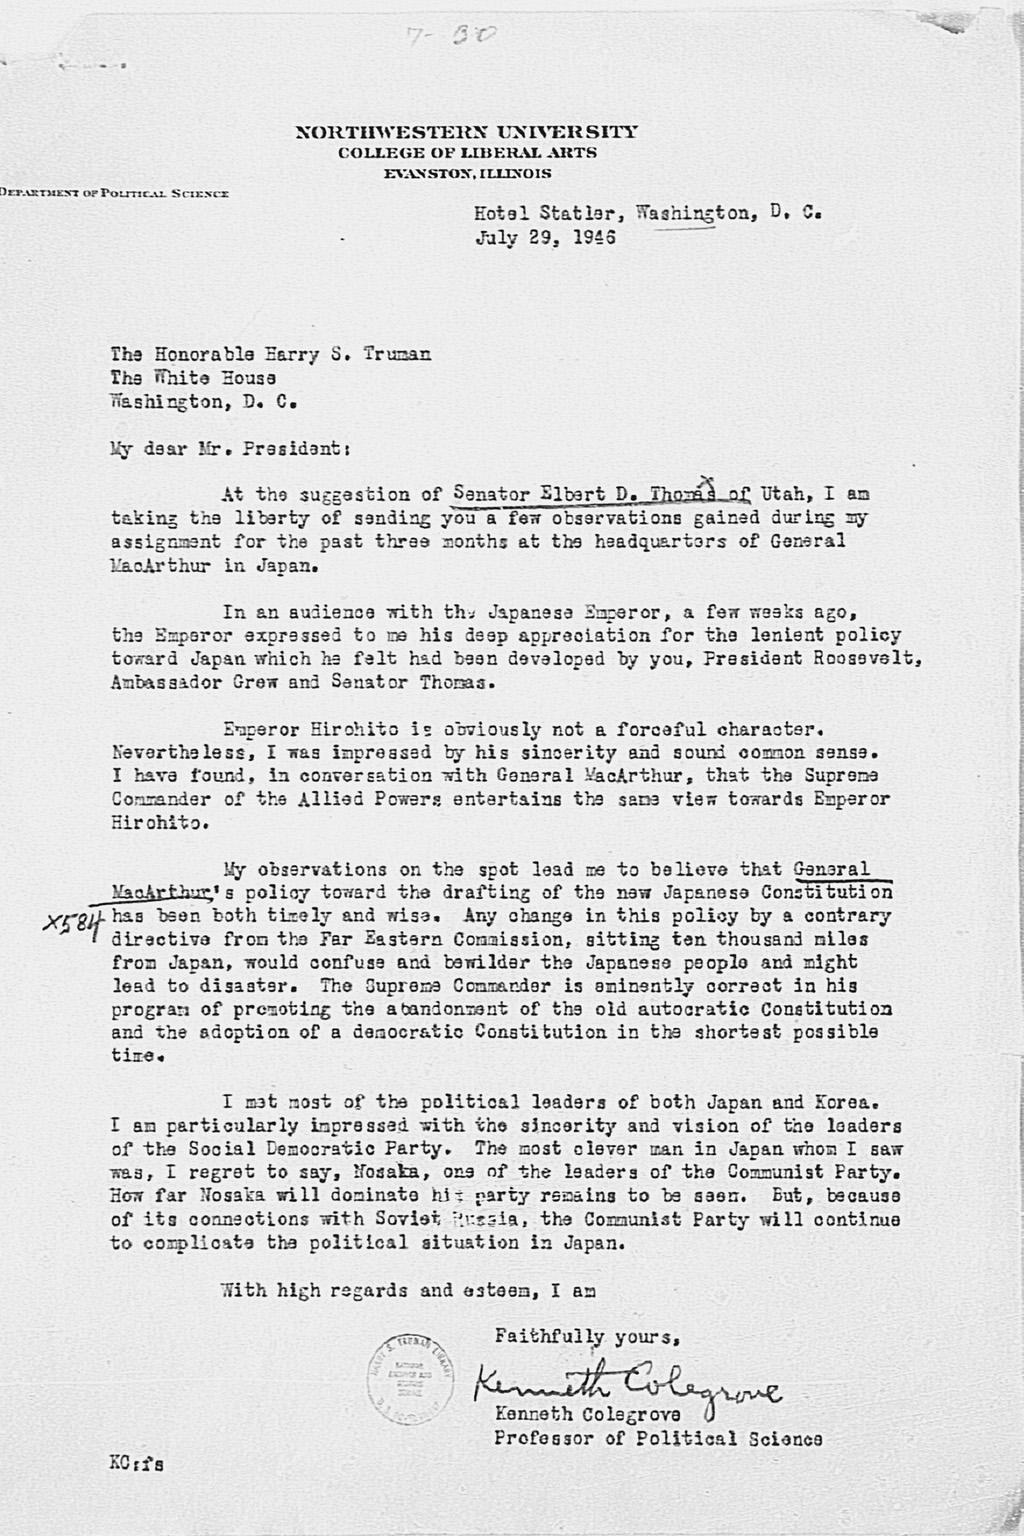 『Letter from Kenneth Colegrove to President Harry S. Truman, dated July 29, 1946』(拡大画像)